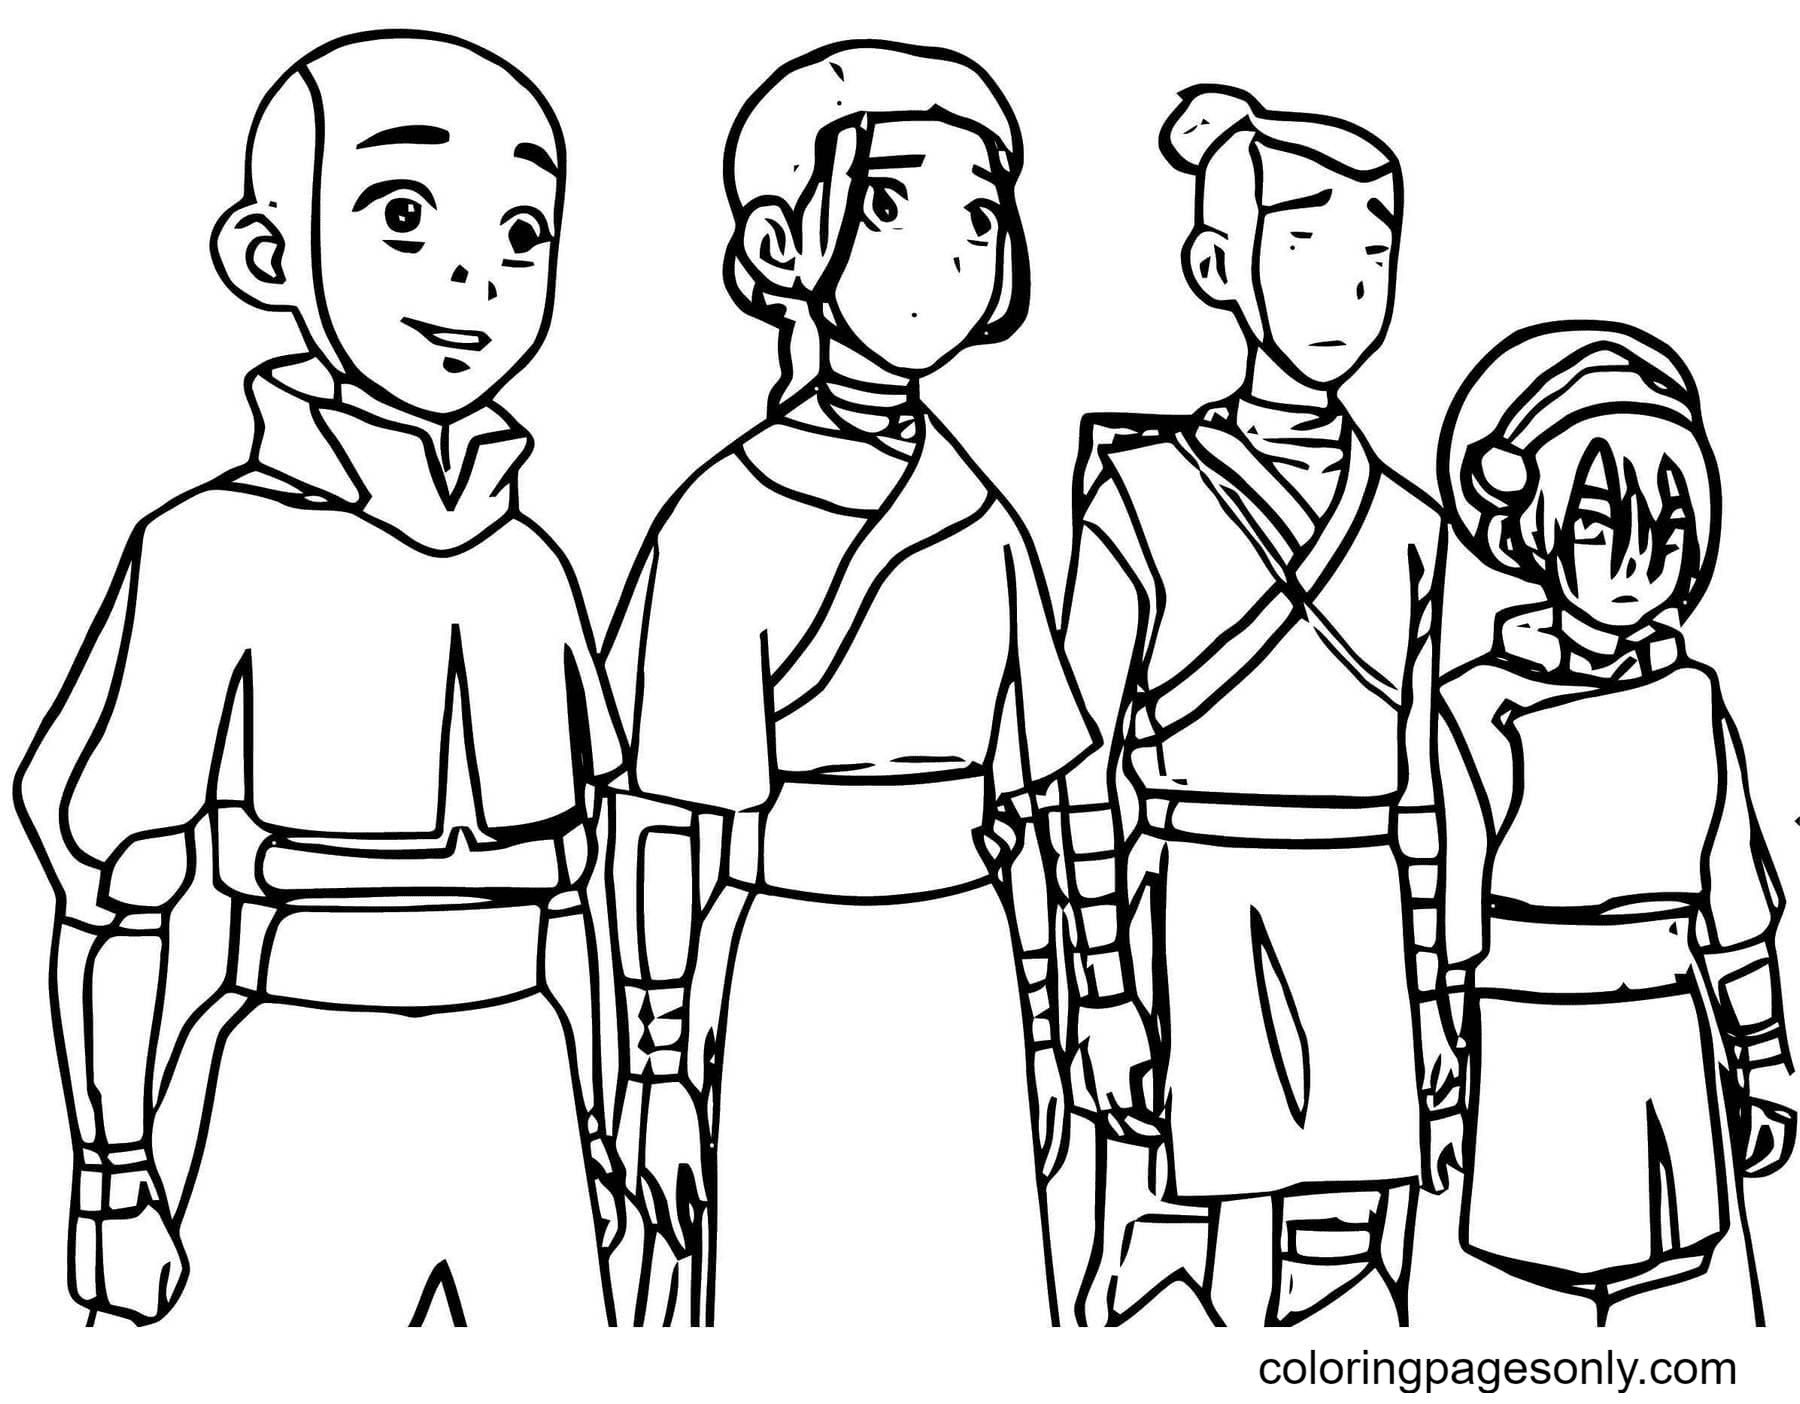 Characters From The Anime Avatar Coloring Pages